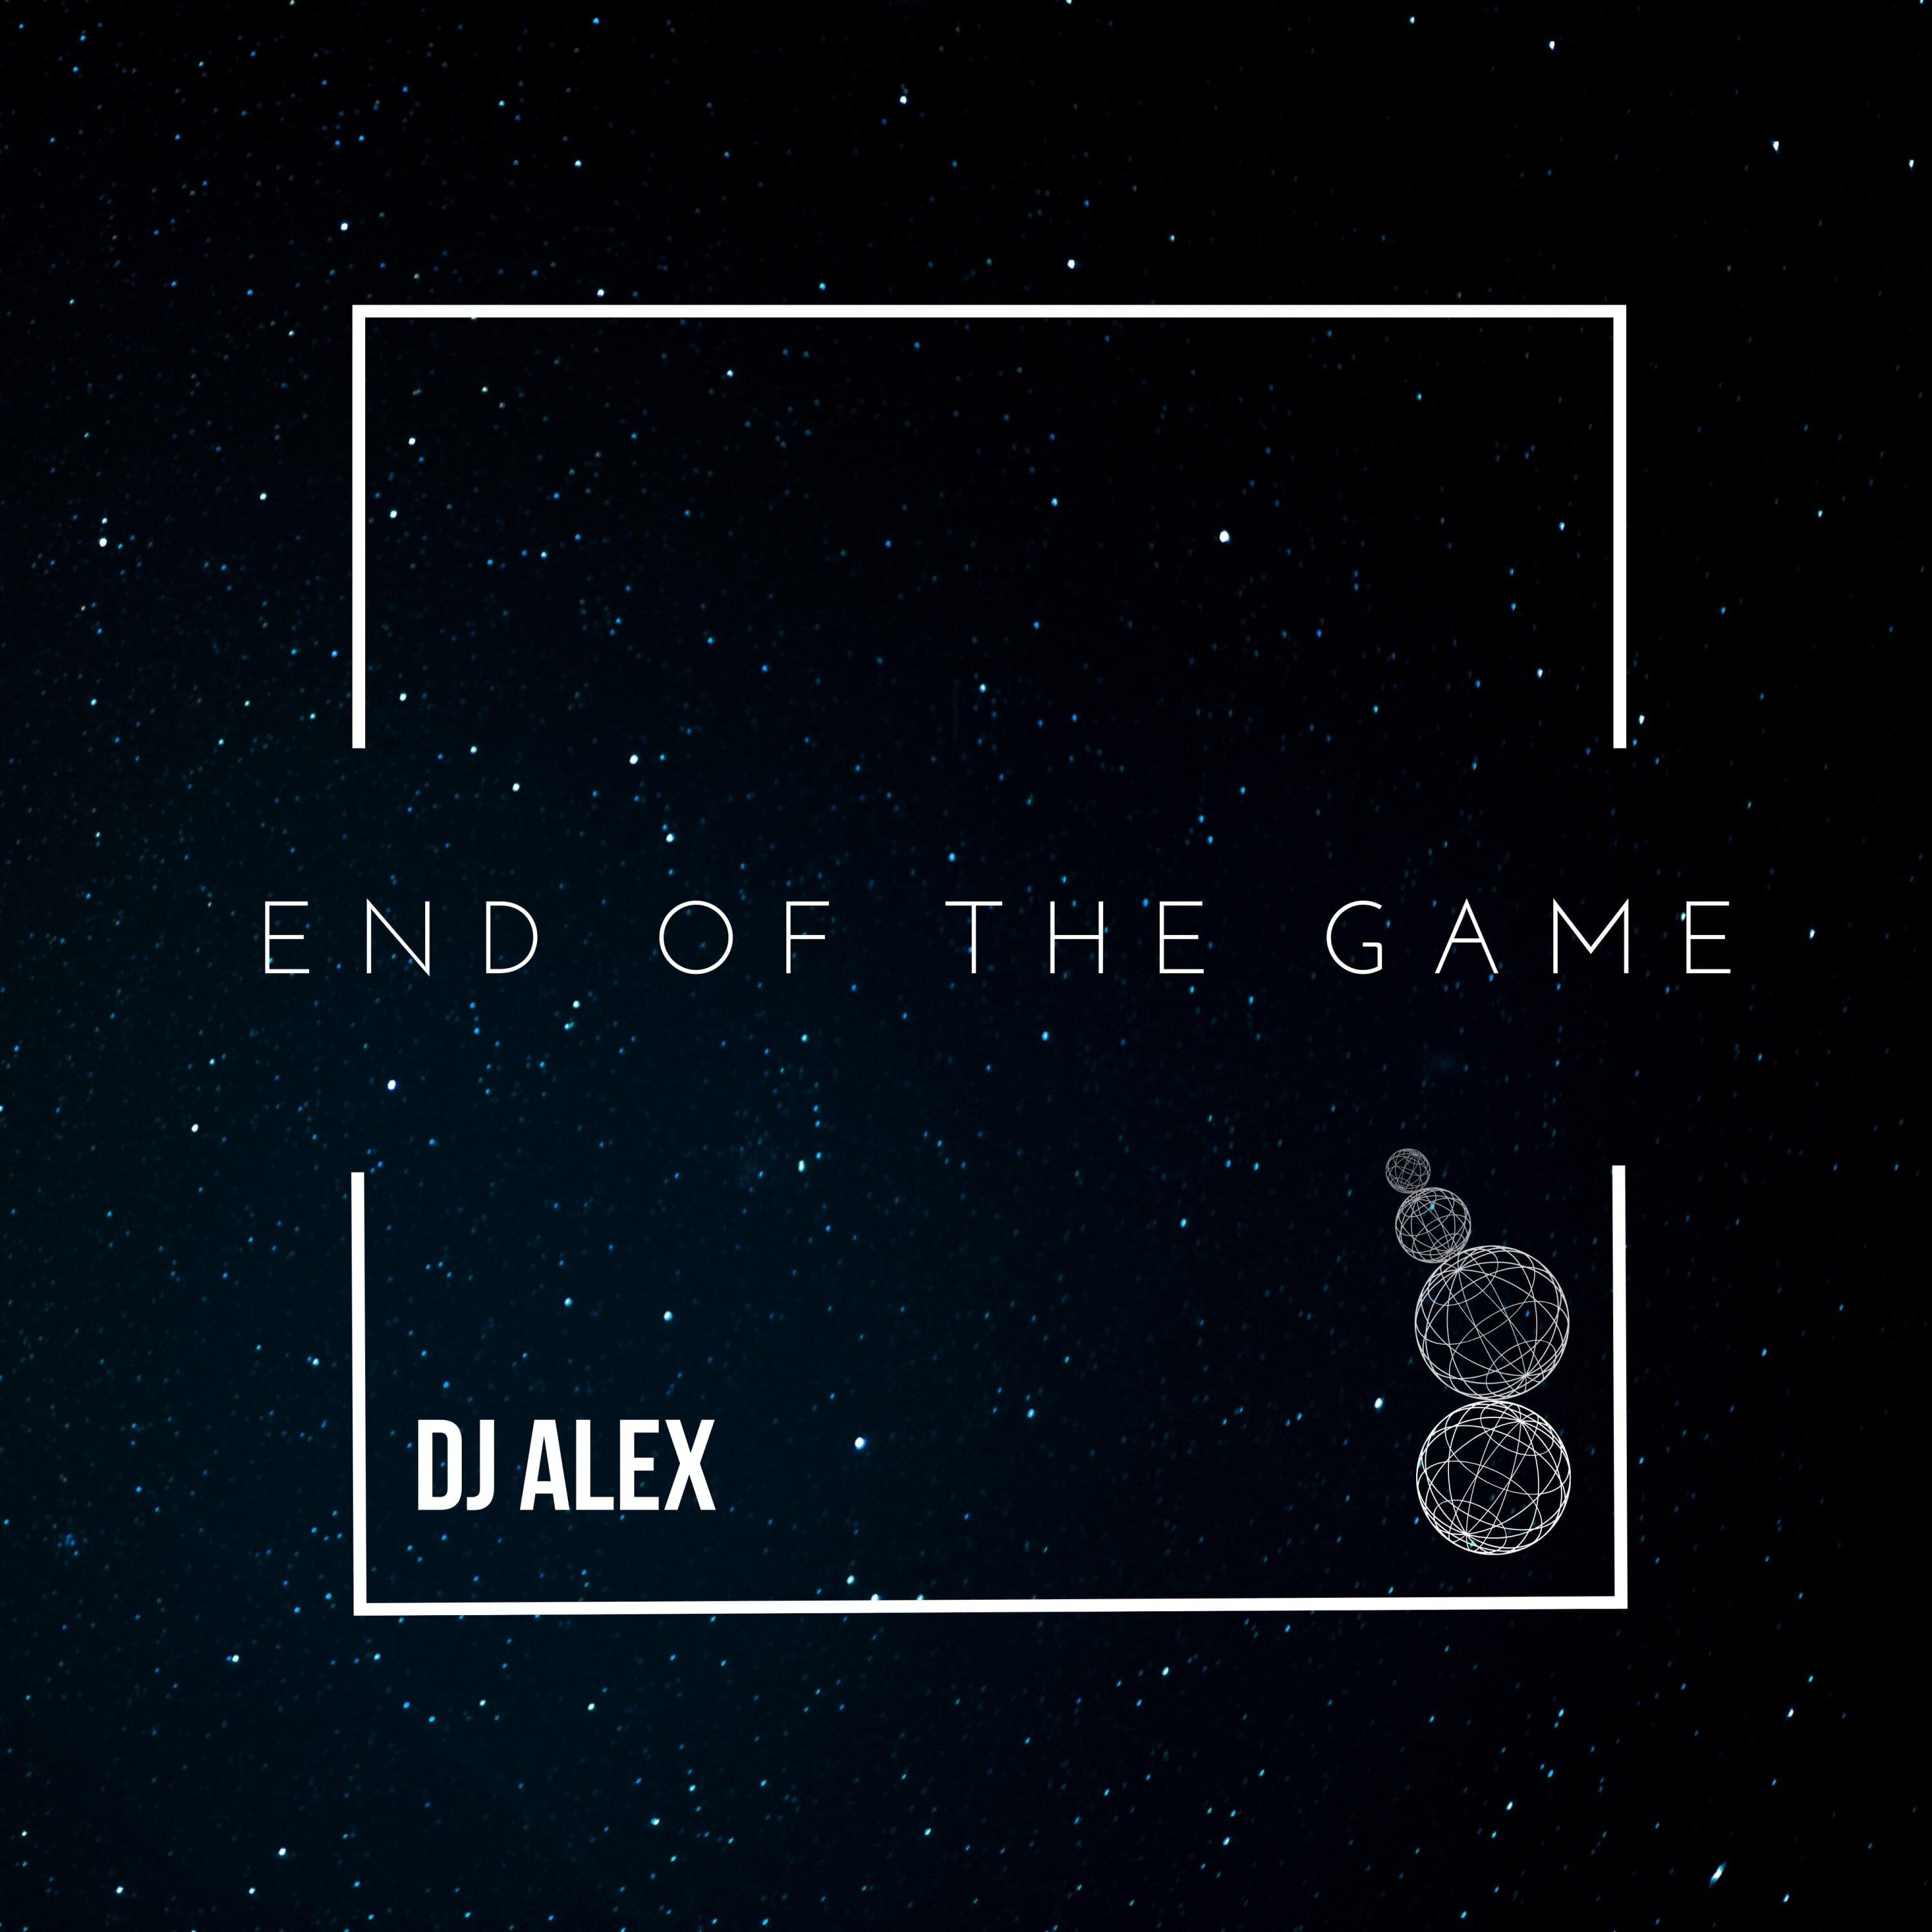 DJ Alex - End of the Game